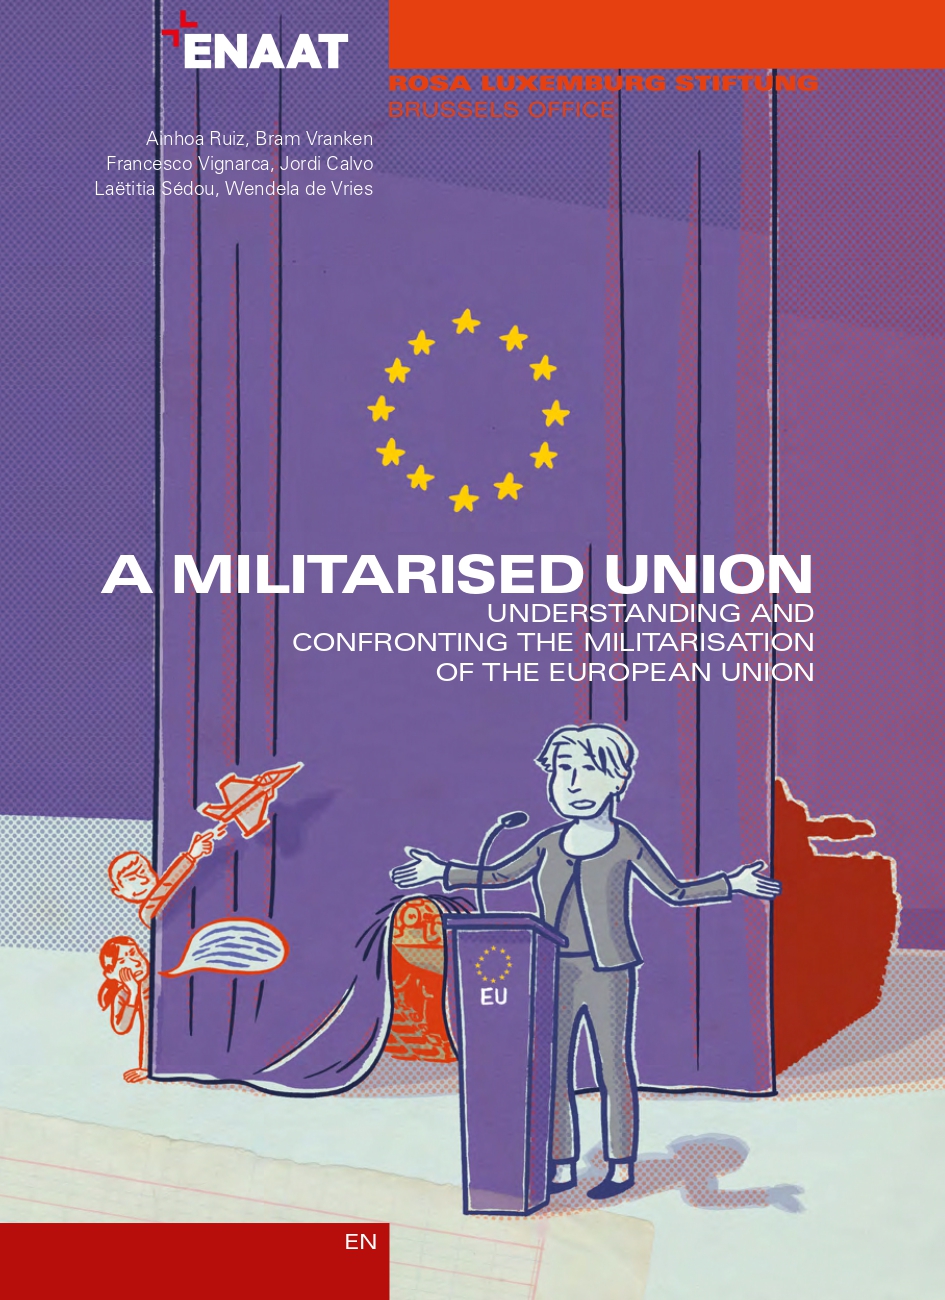 A militarised Union. Understanding and confronting the militarisation of the European Union